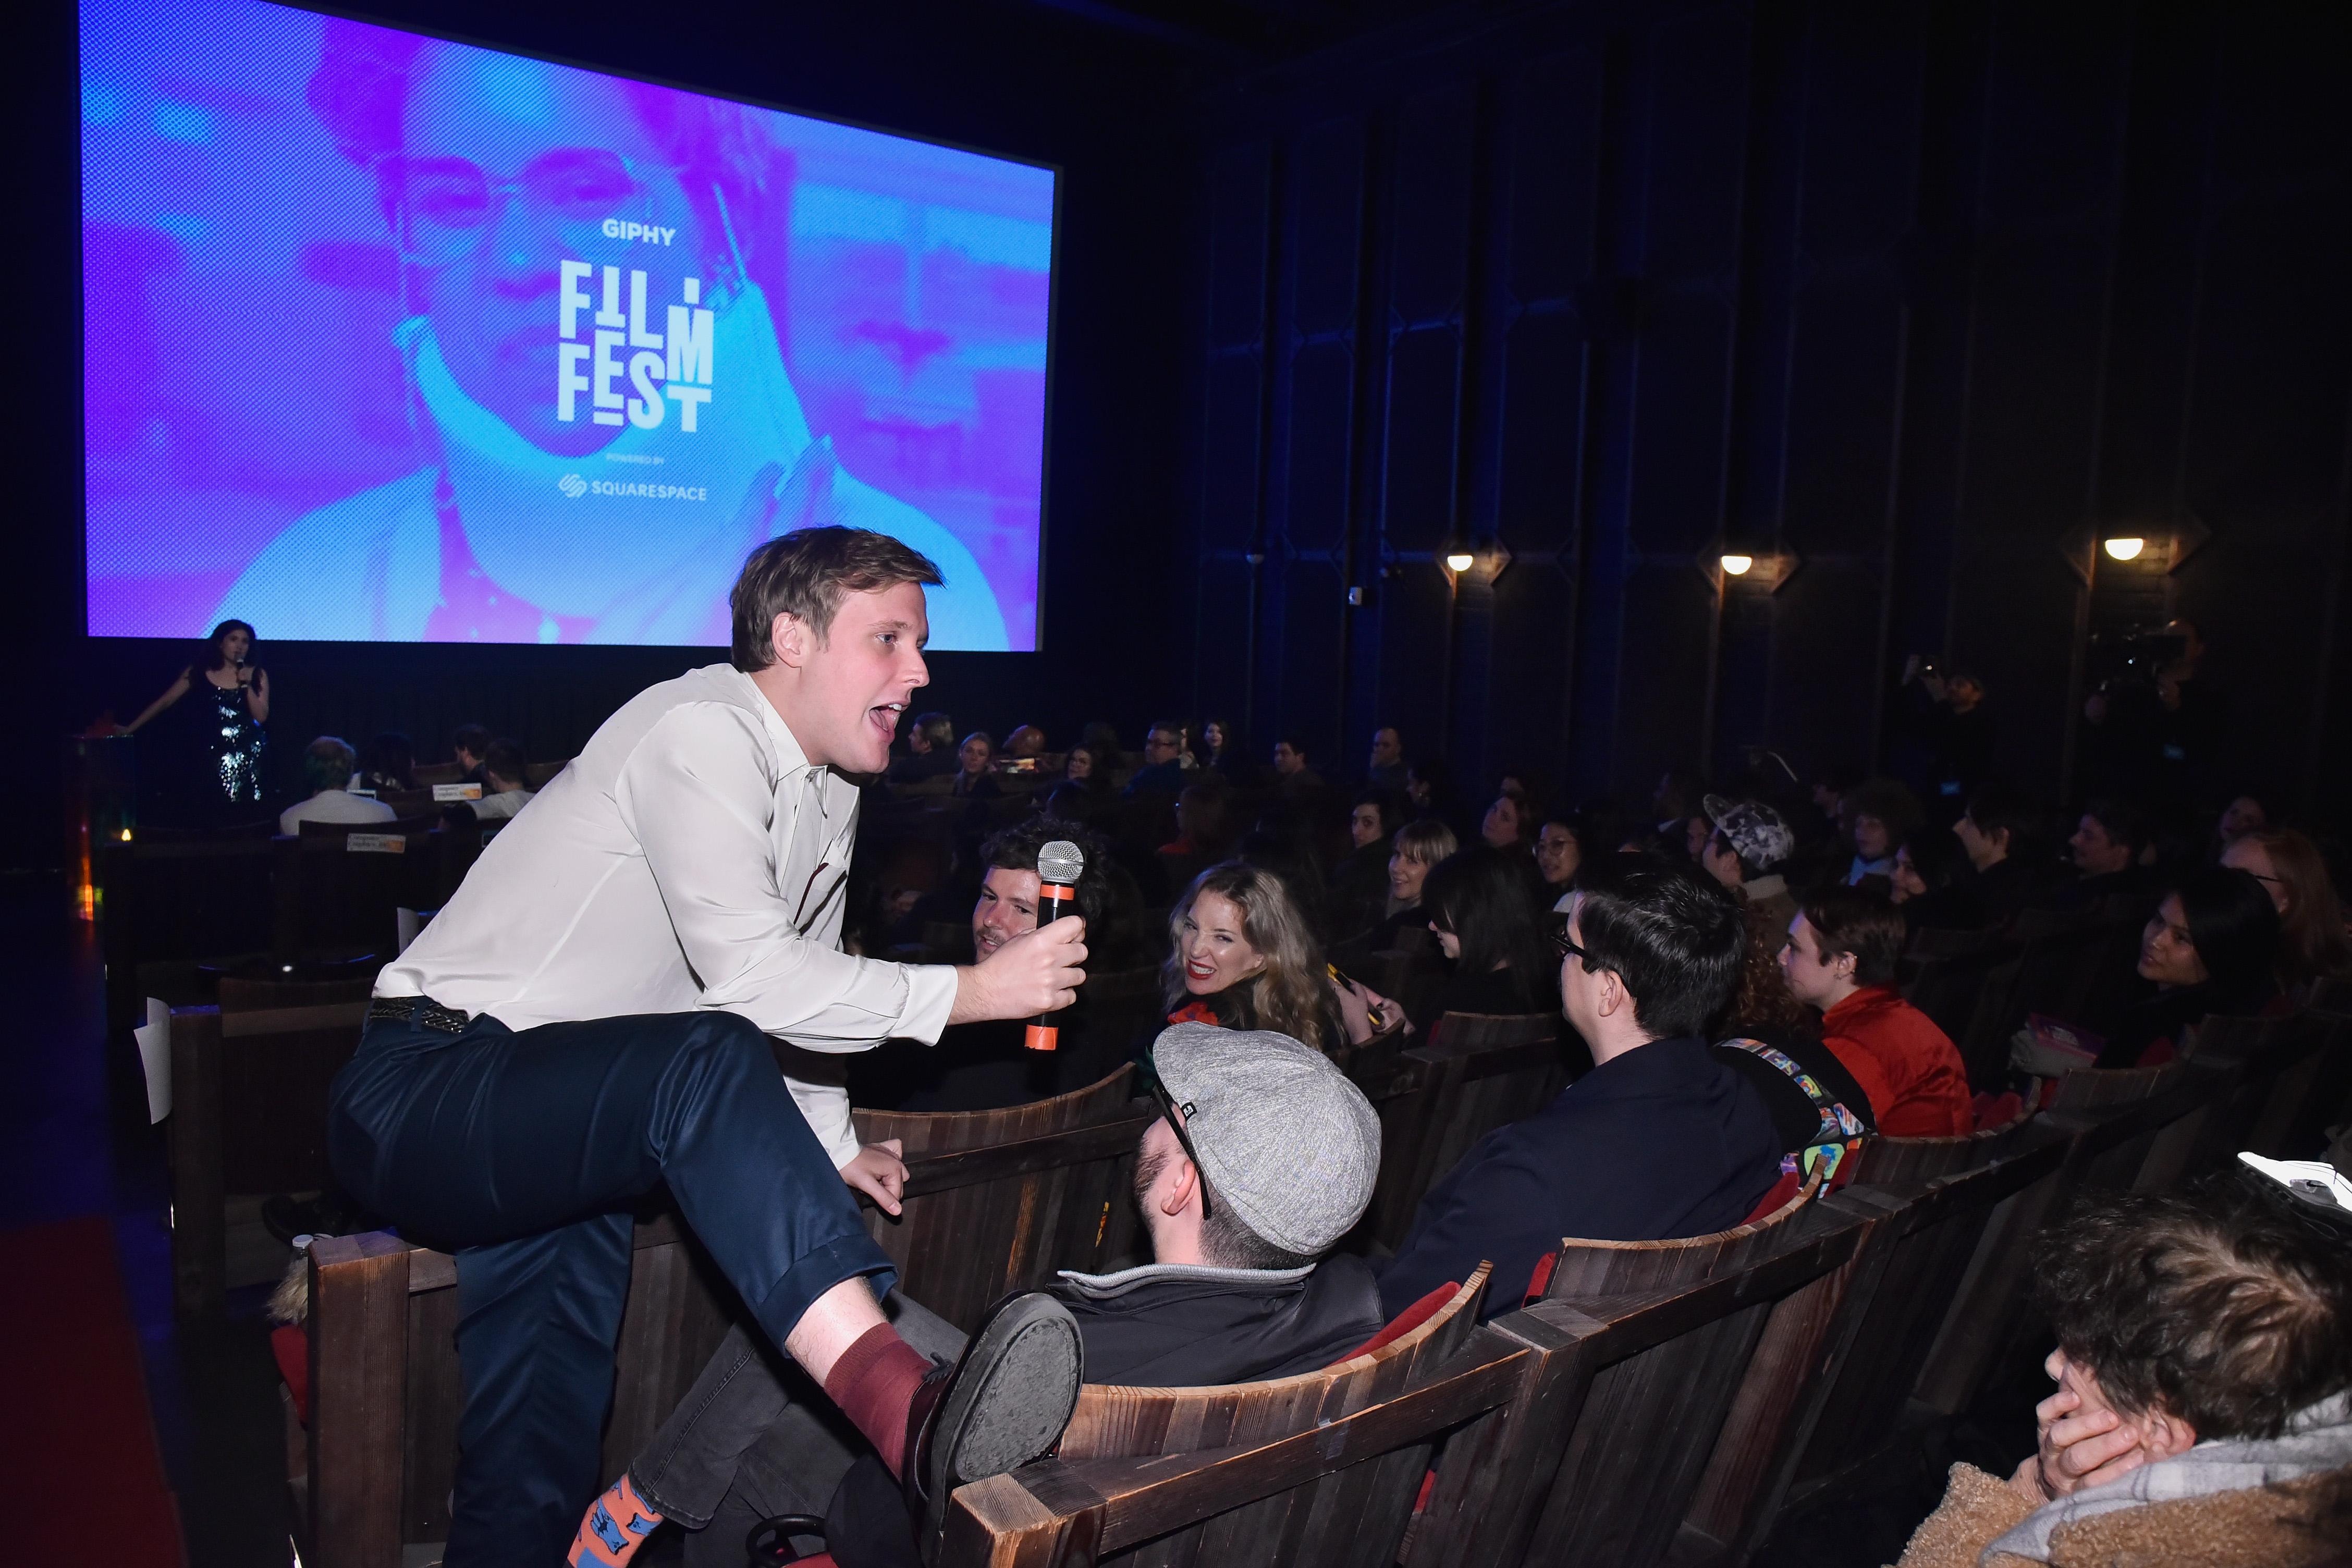 John Early doing crowd work in the audience at the Giphy Film Fest.